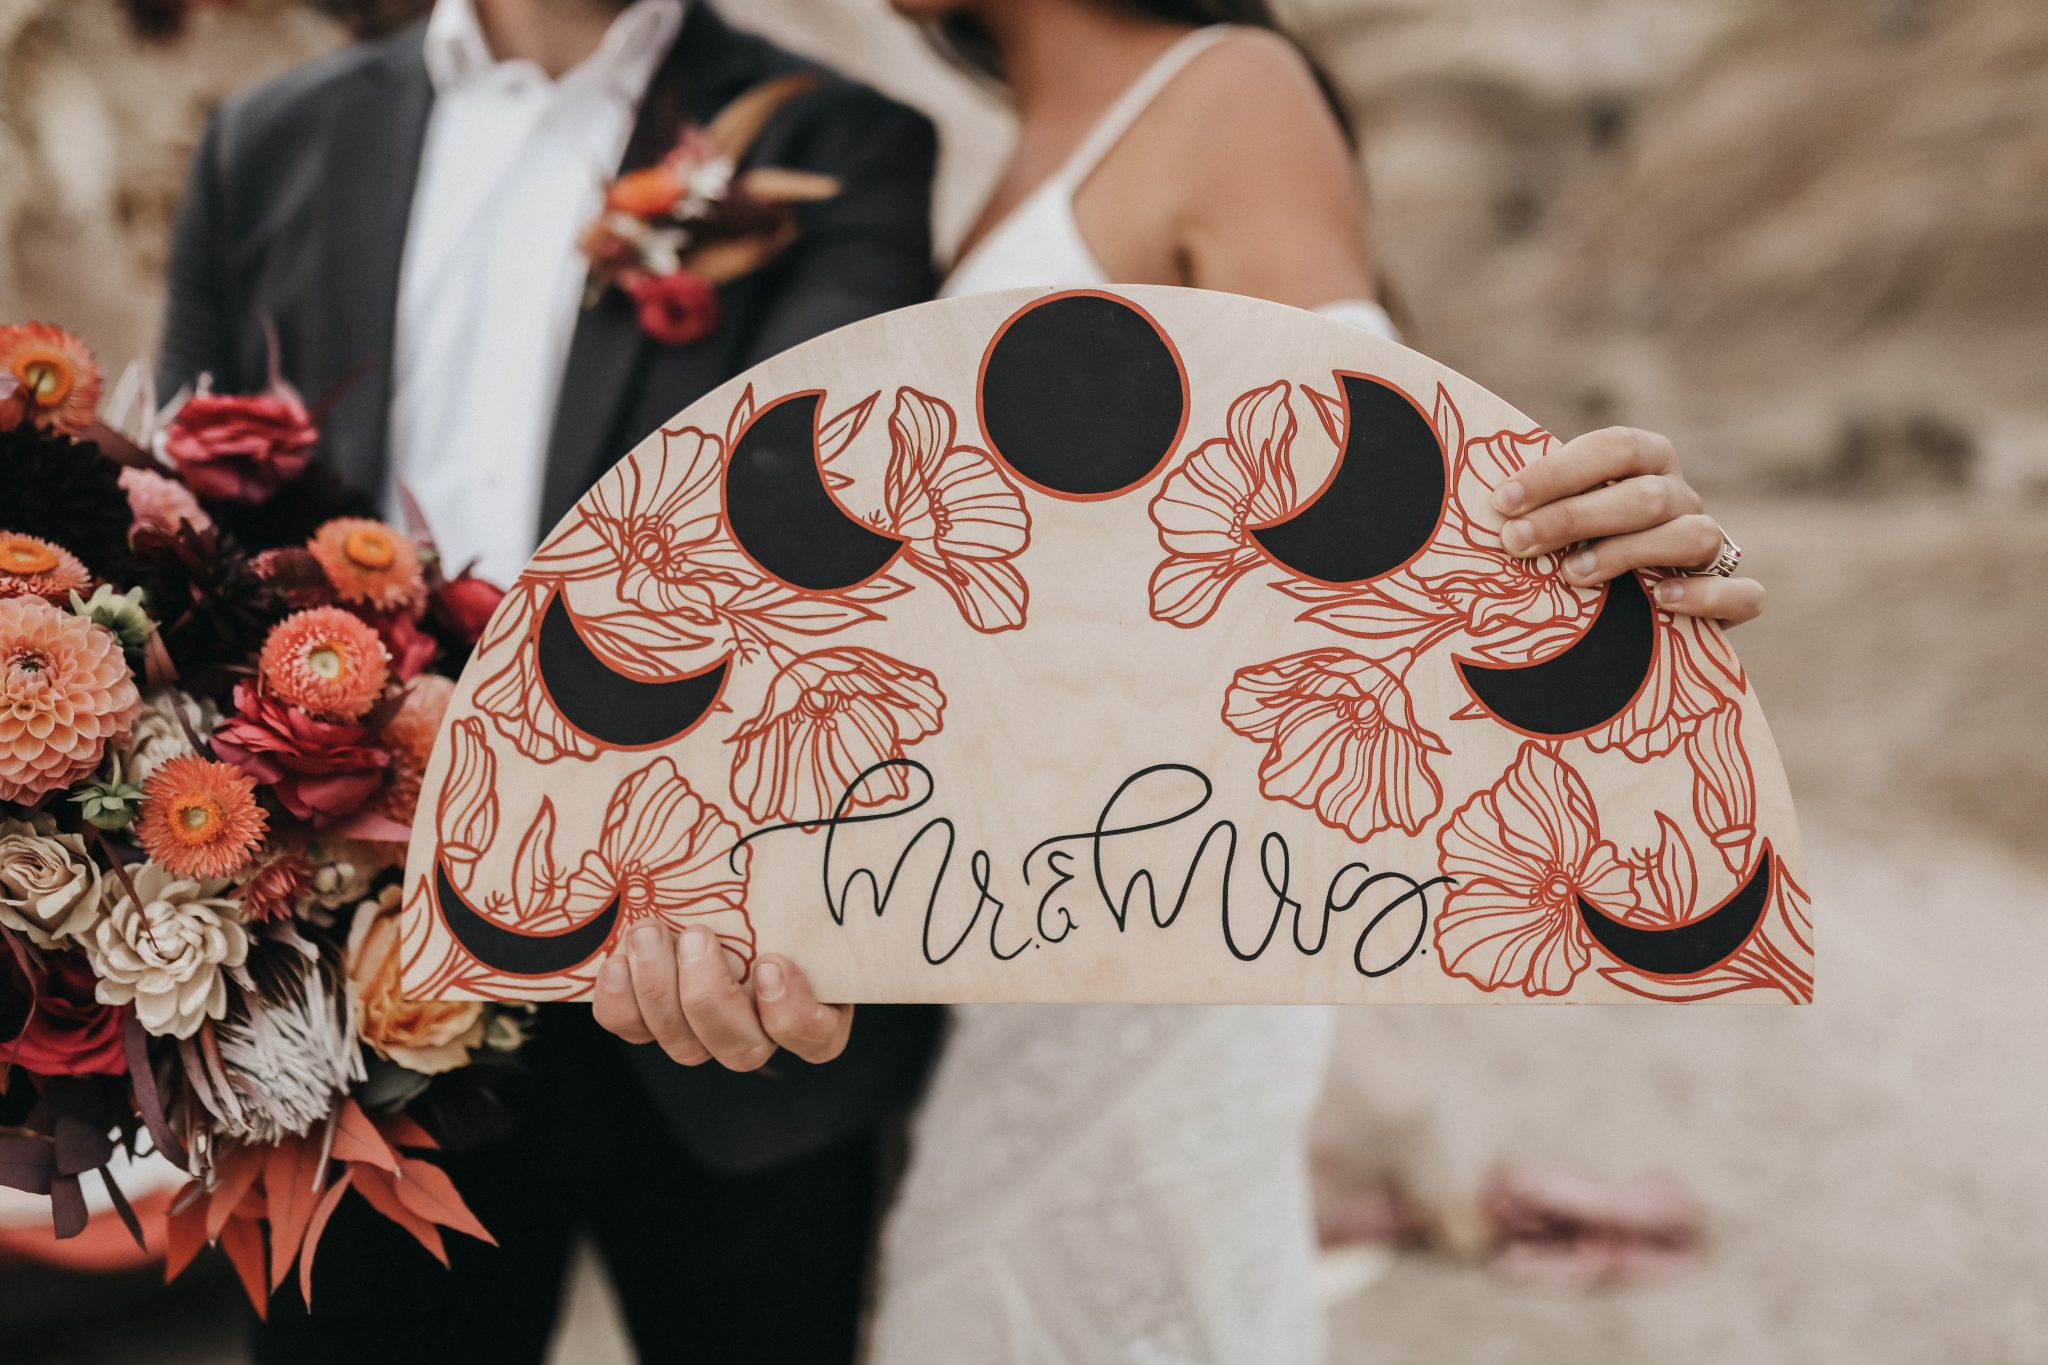 Moon cycle Mr. and Mrs. sign for creative wedding decor inspiration